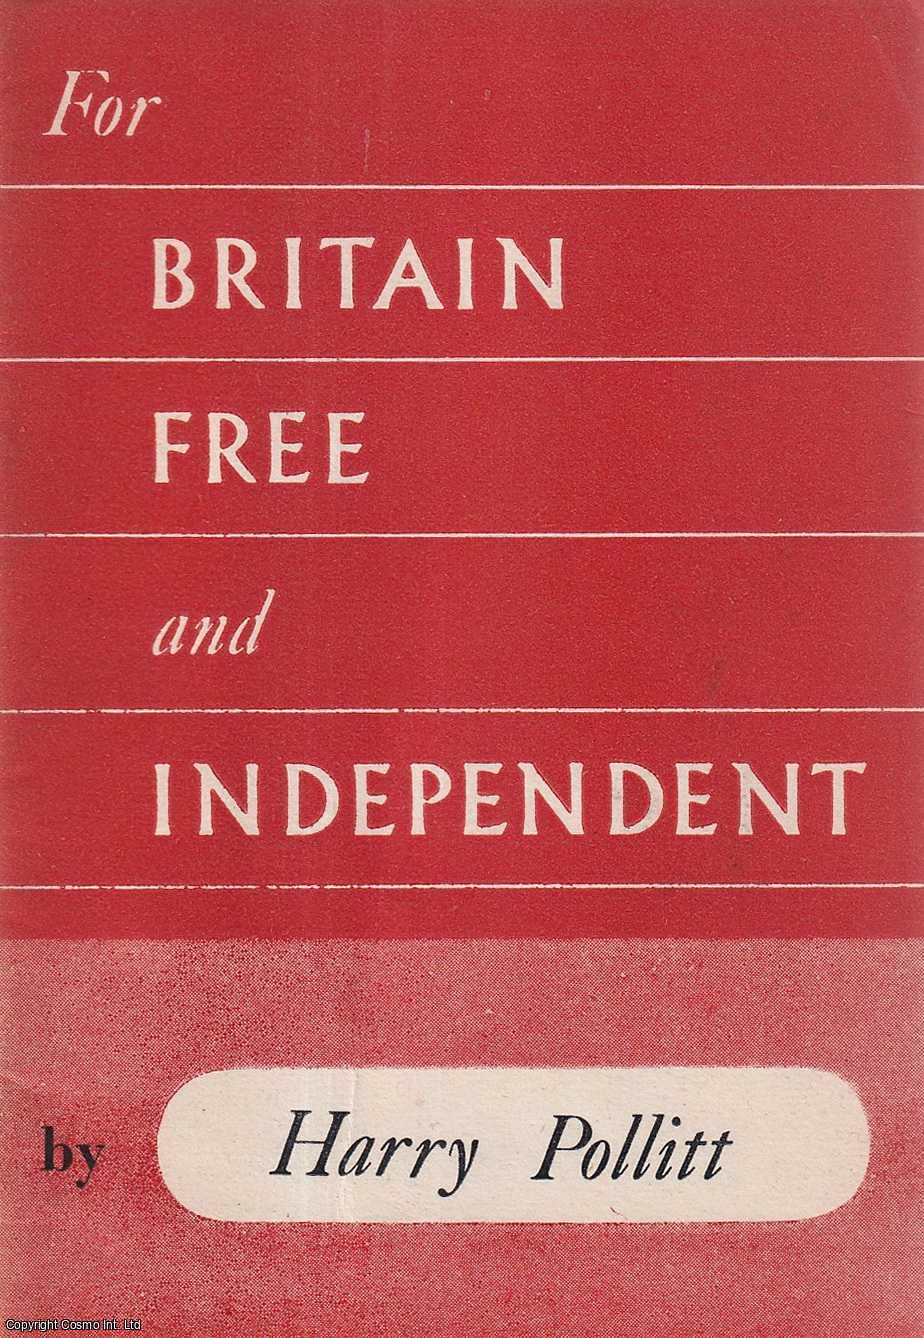 Harry Pollitt - For Britain Free and Independent. A Report made to the 20th National Congress of the Communist Party, with a Reply to Discussion.